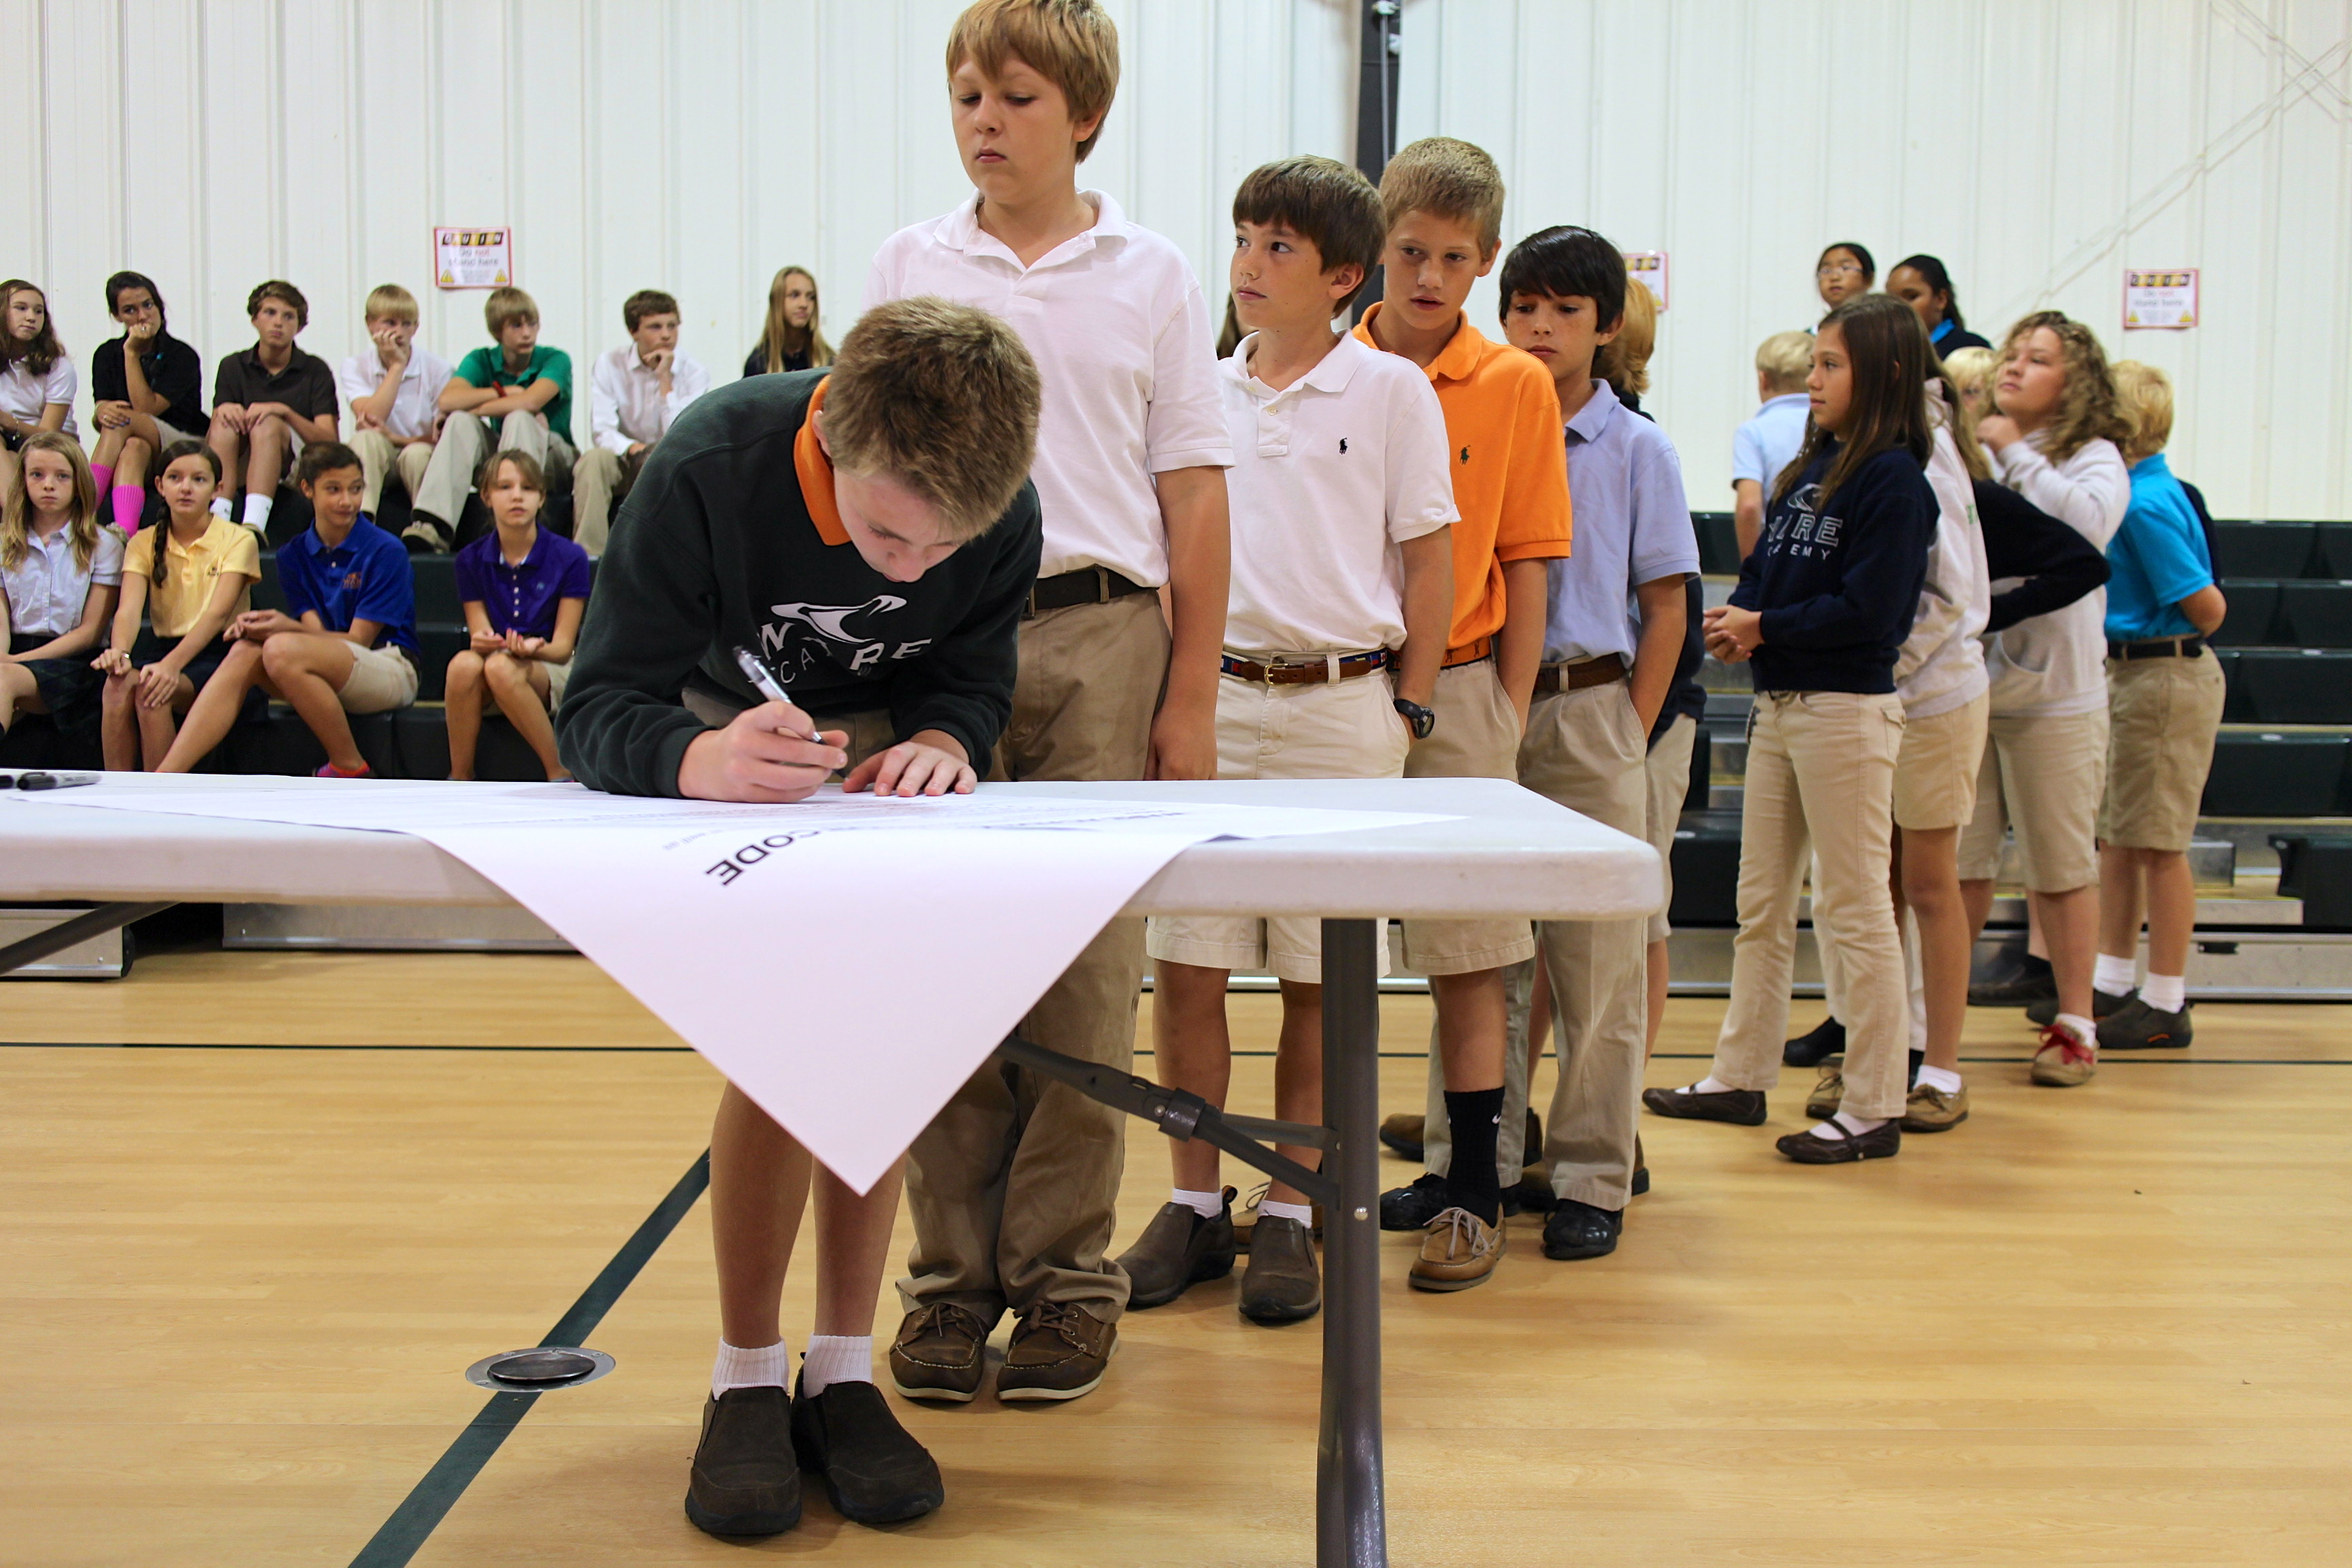 Ware Academy’s middle school students gathered Sept. 30 to sign the independent day school's honor code in front of witnesses.